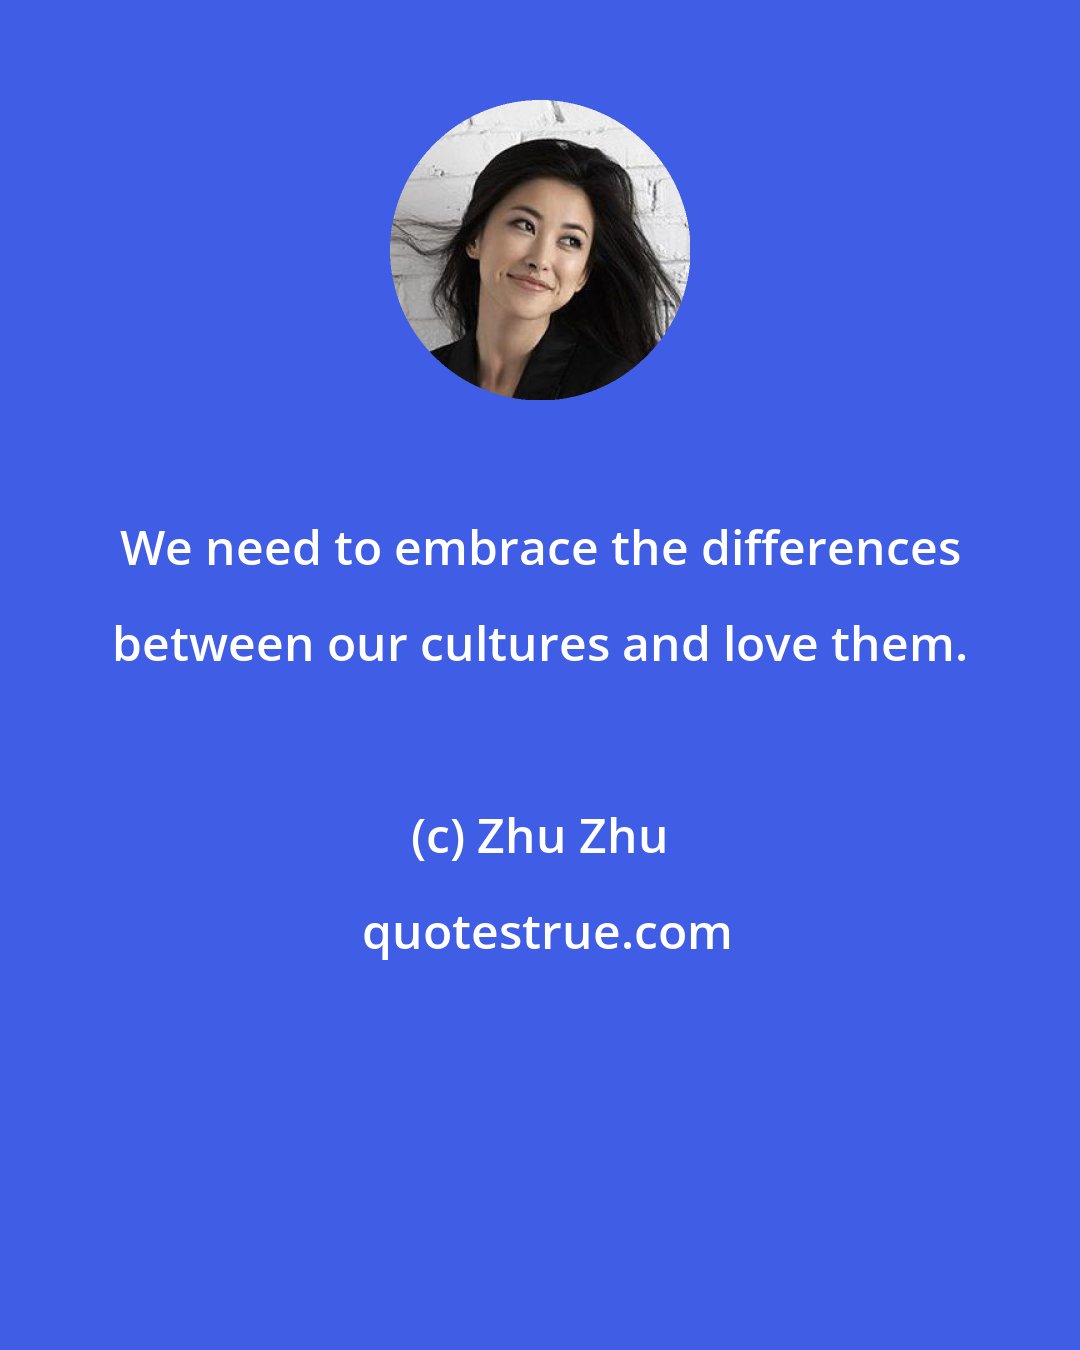 Zhu Zhu: We need to embrace the differences between our cultures and love them.